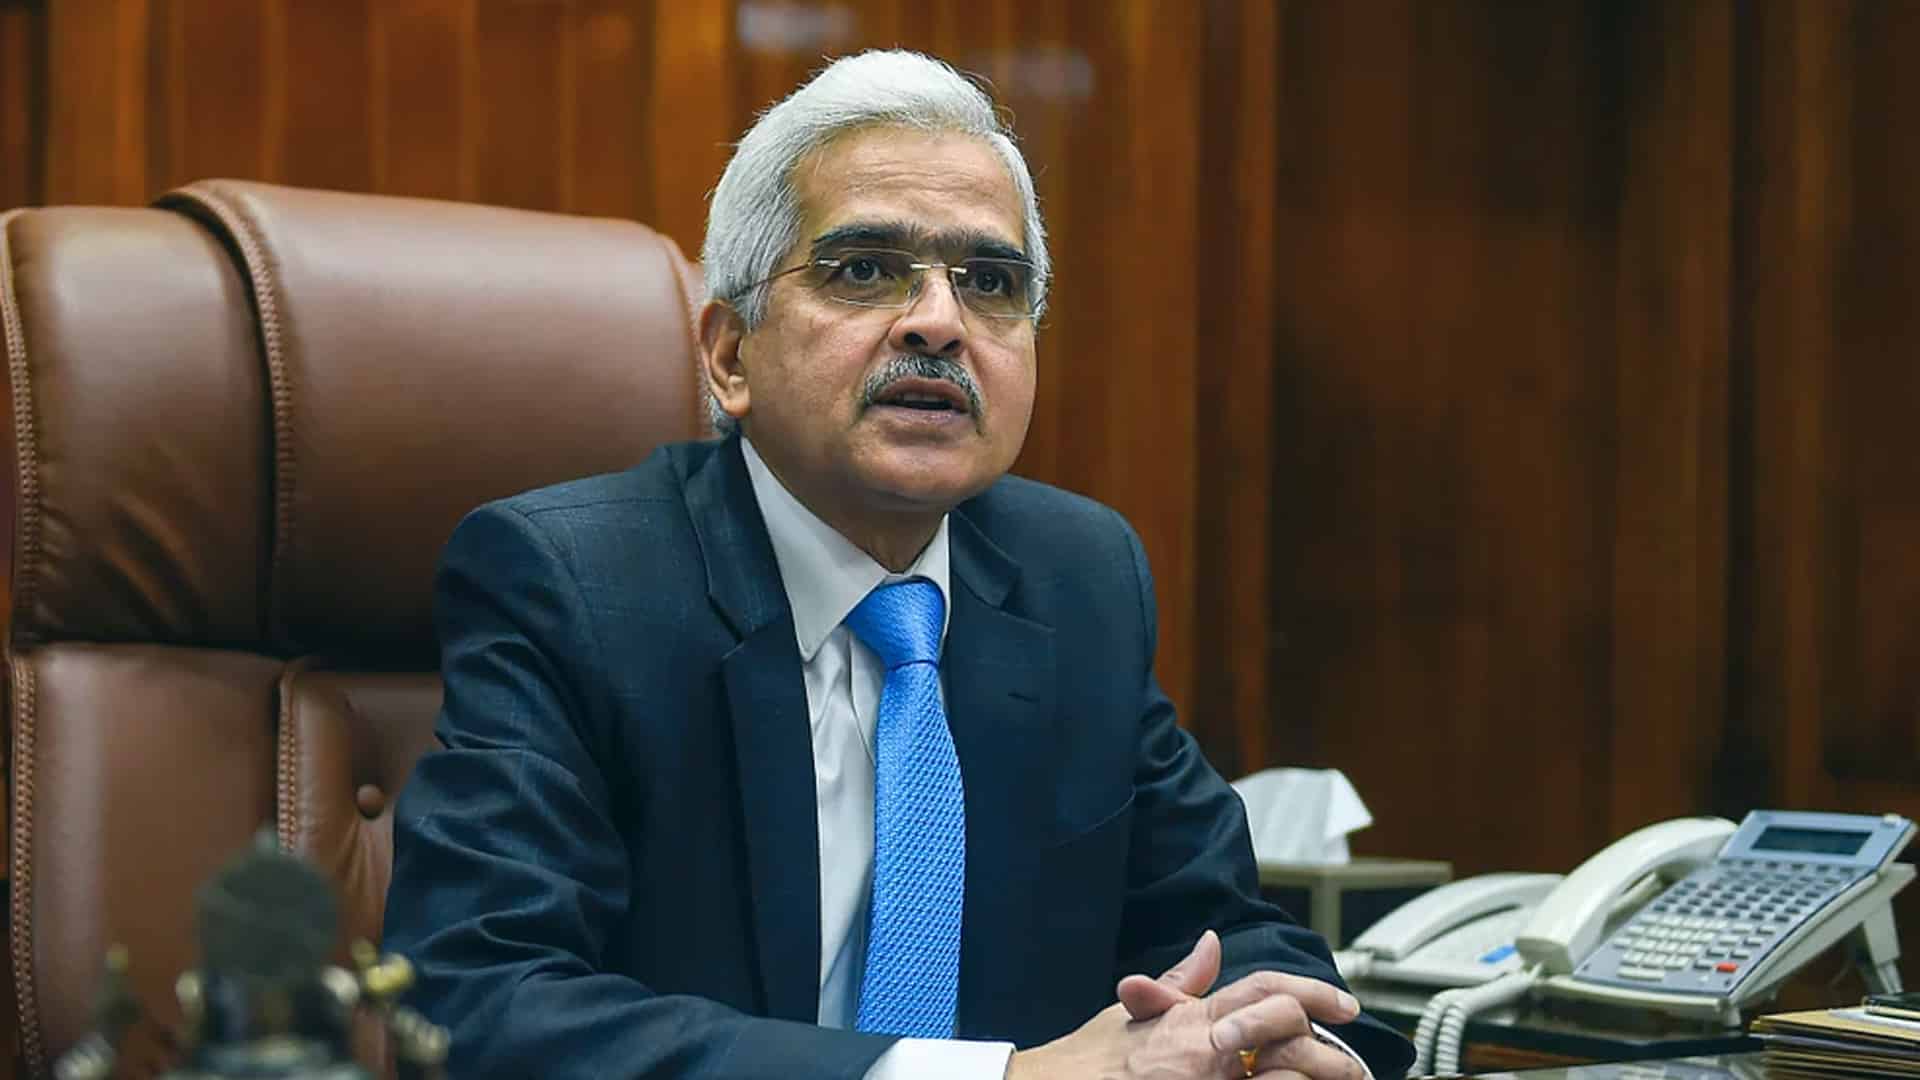 Big tech's financial services play poses systemic concerns like overleverage: RBI Governor Das